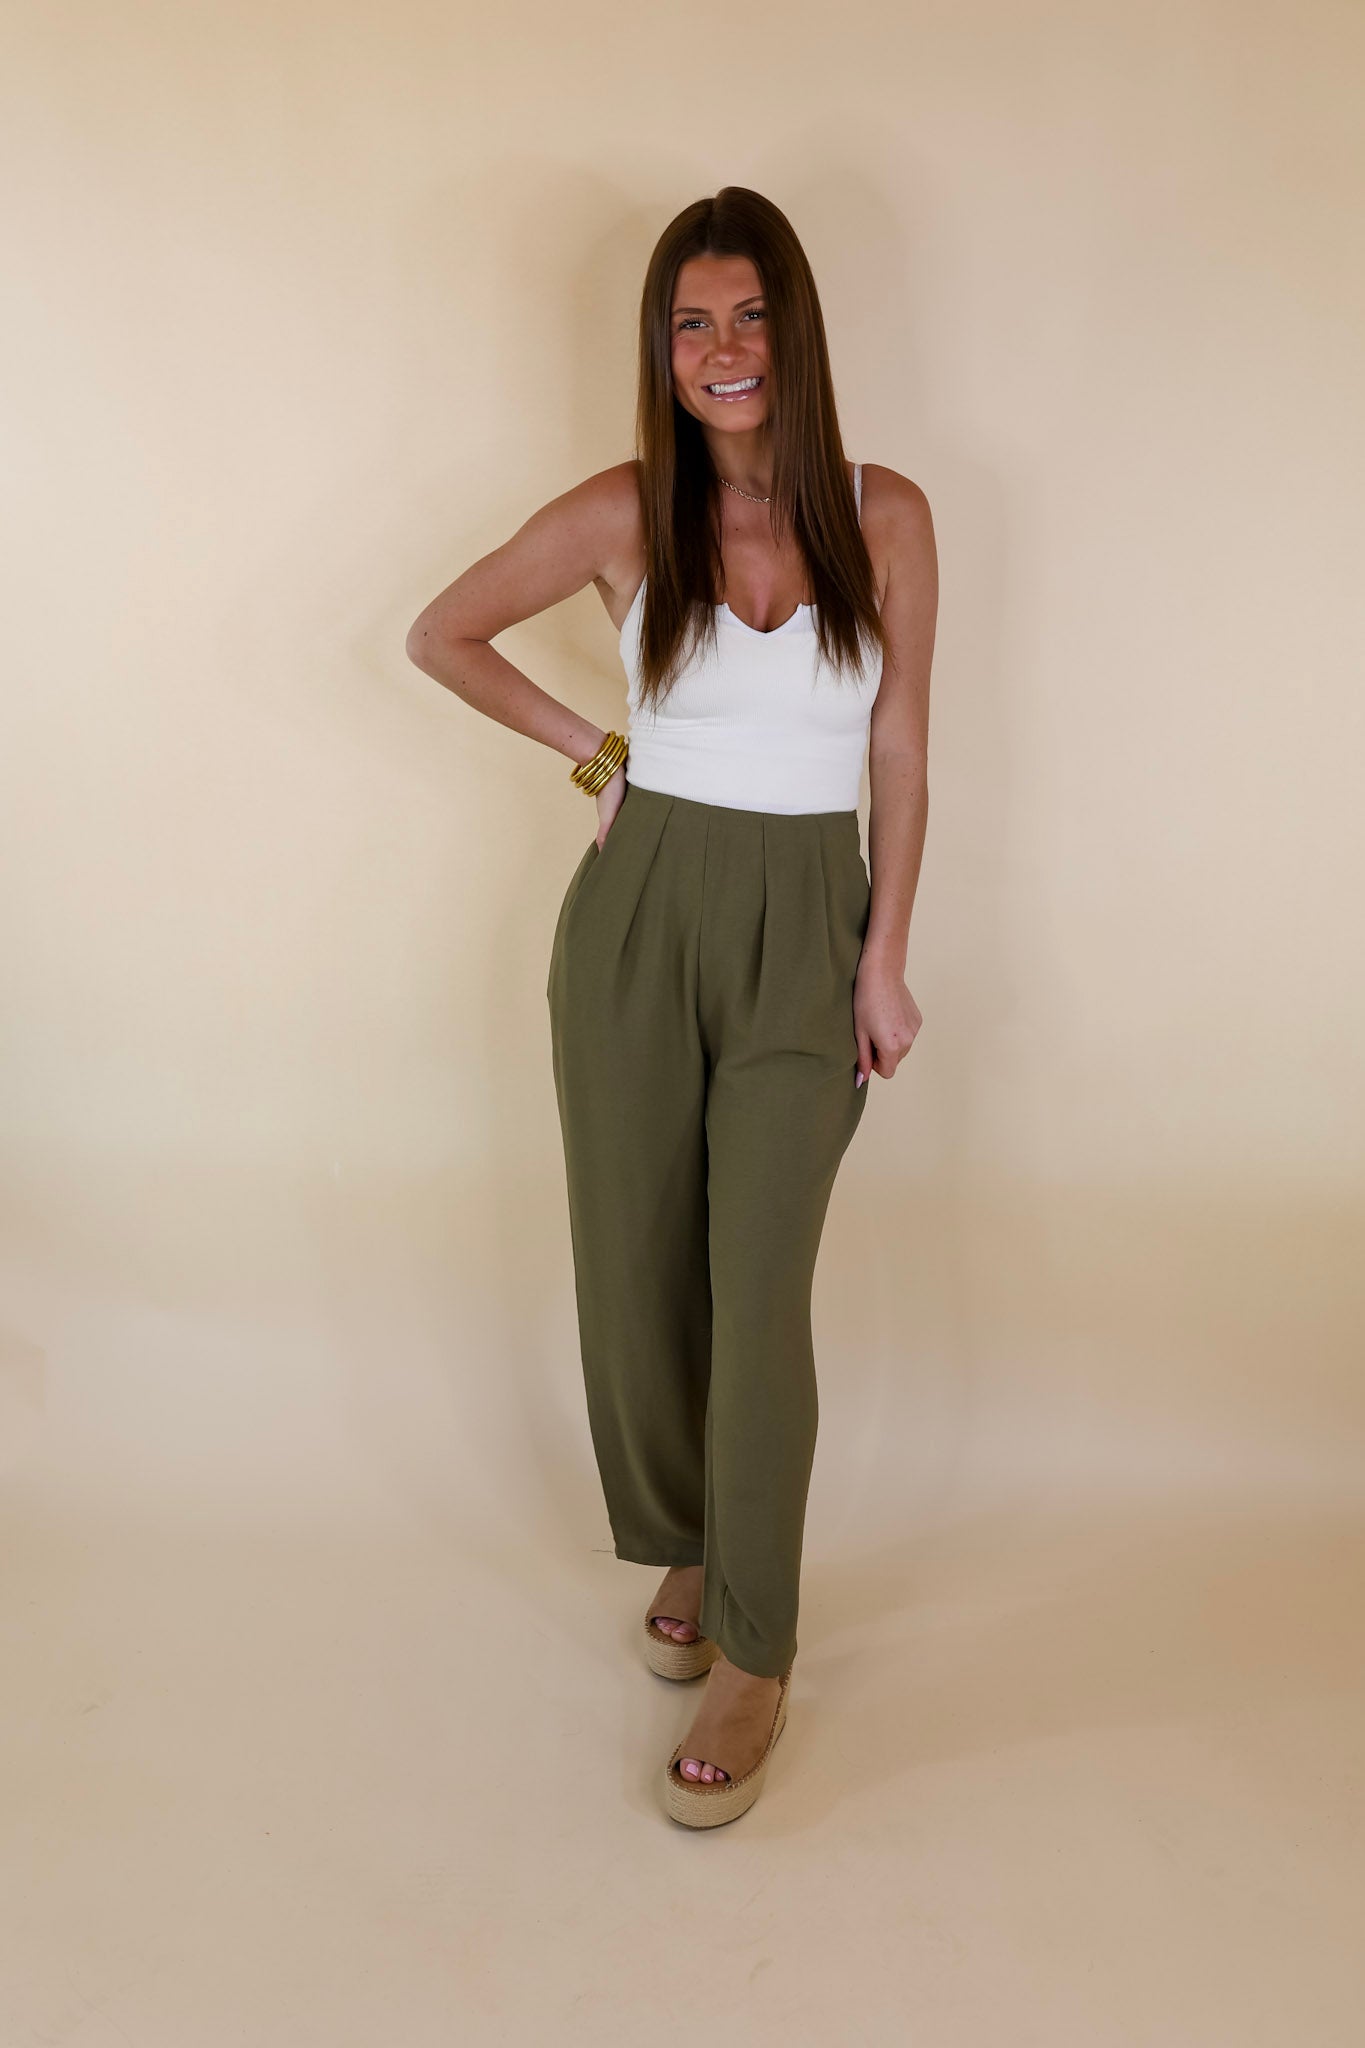 Trading Favors Pleated Detail Pants in Olive Green - Giddy Up Glamour Boutique